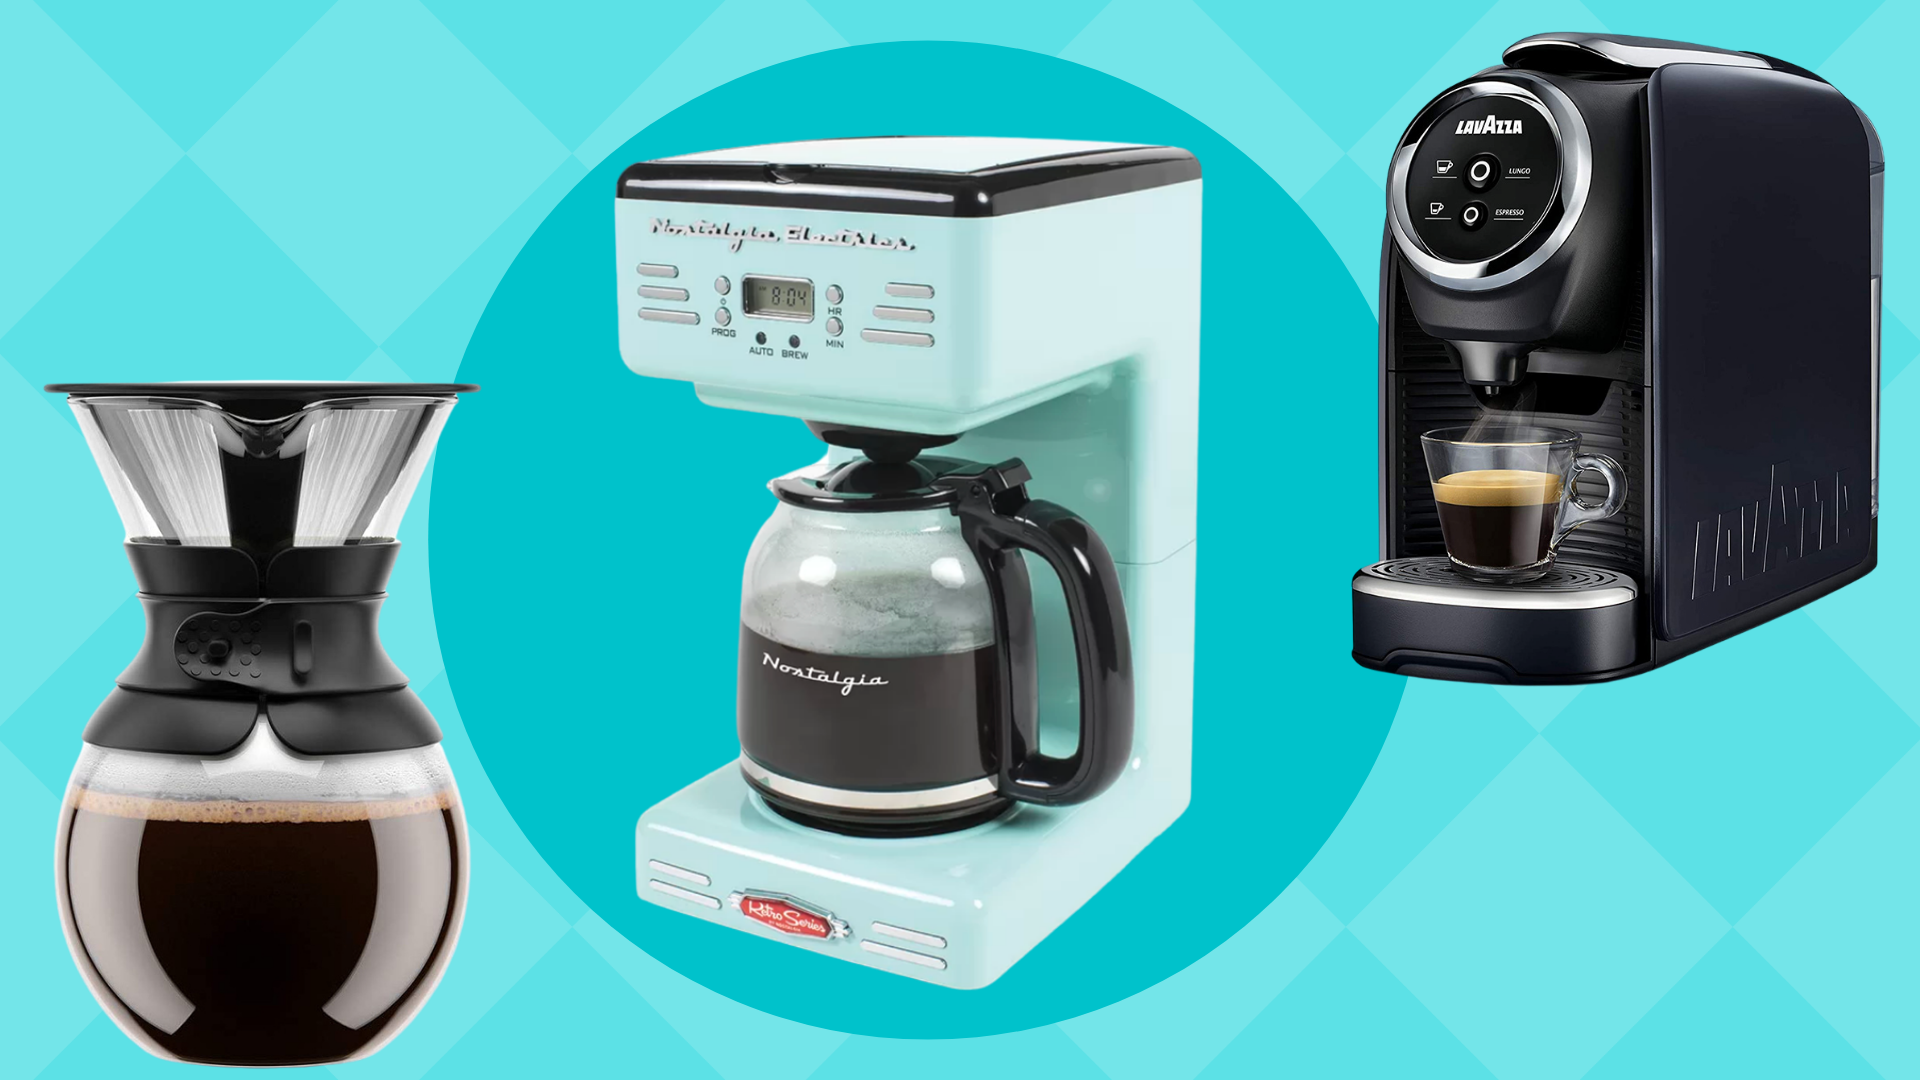 The 10 Best Coffee Makers Under 100 You Can Buy in 2021 Woman's World